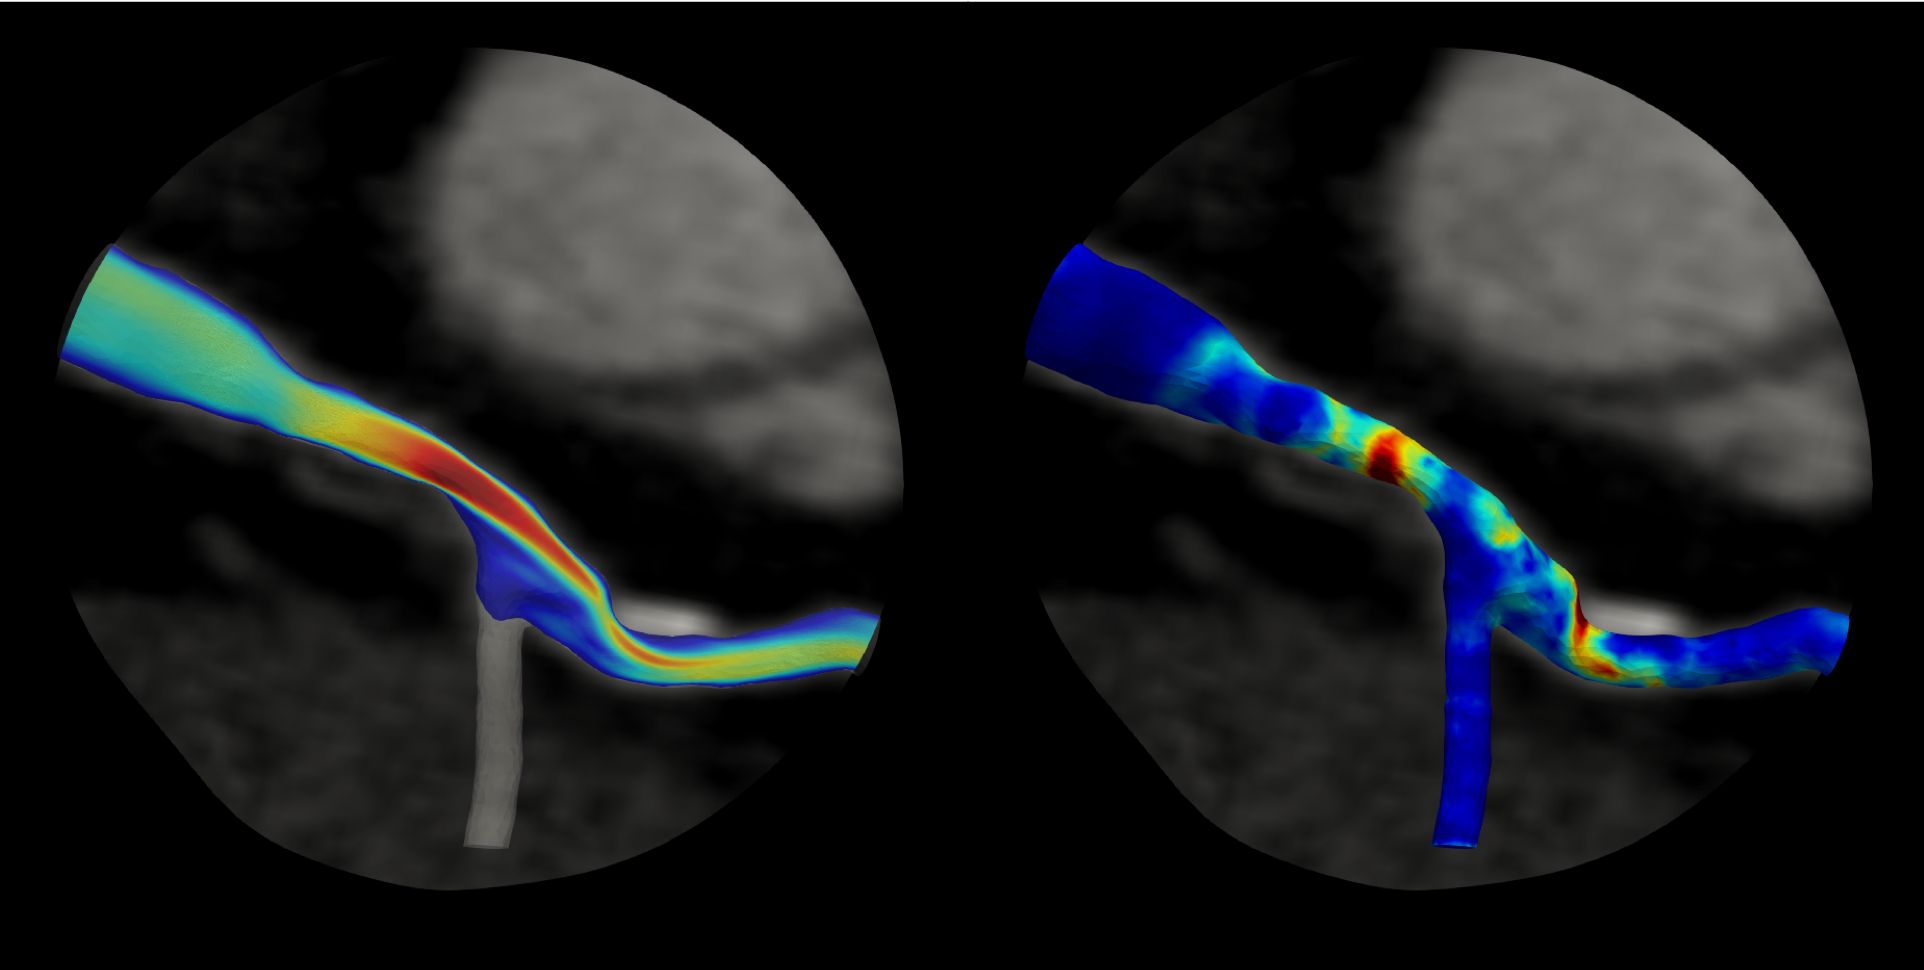 Graphic image of pressure velocity in the heart to better understand blood flow (left) and pressure gradient (right) in heart artery blockages.